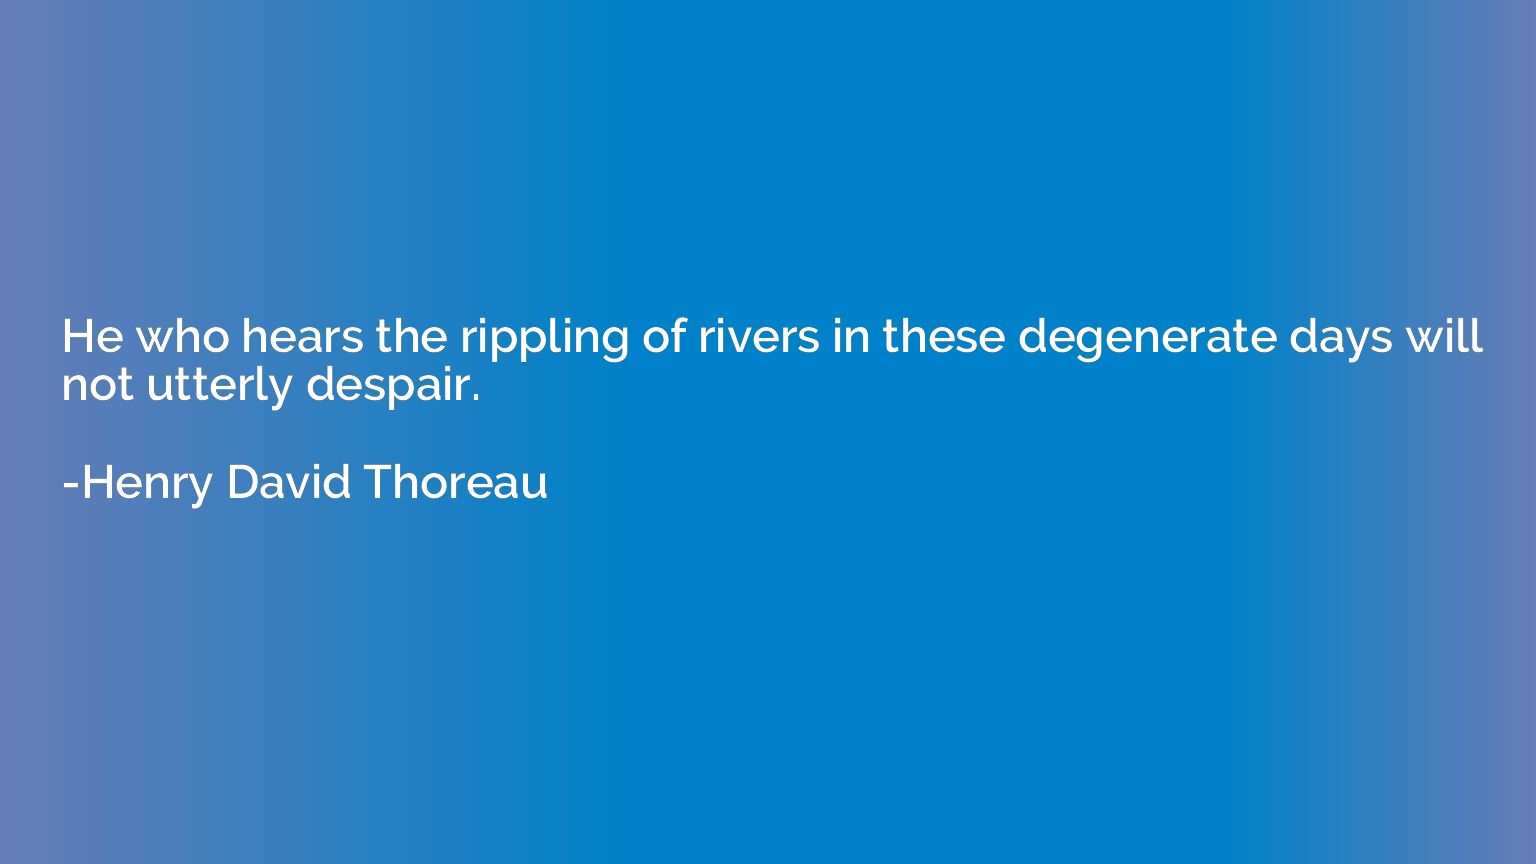 He who hears the rippling of rivers in these degenerate days